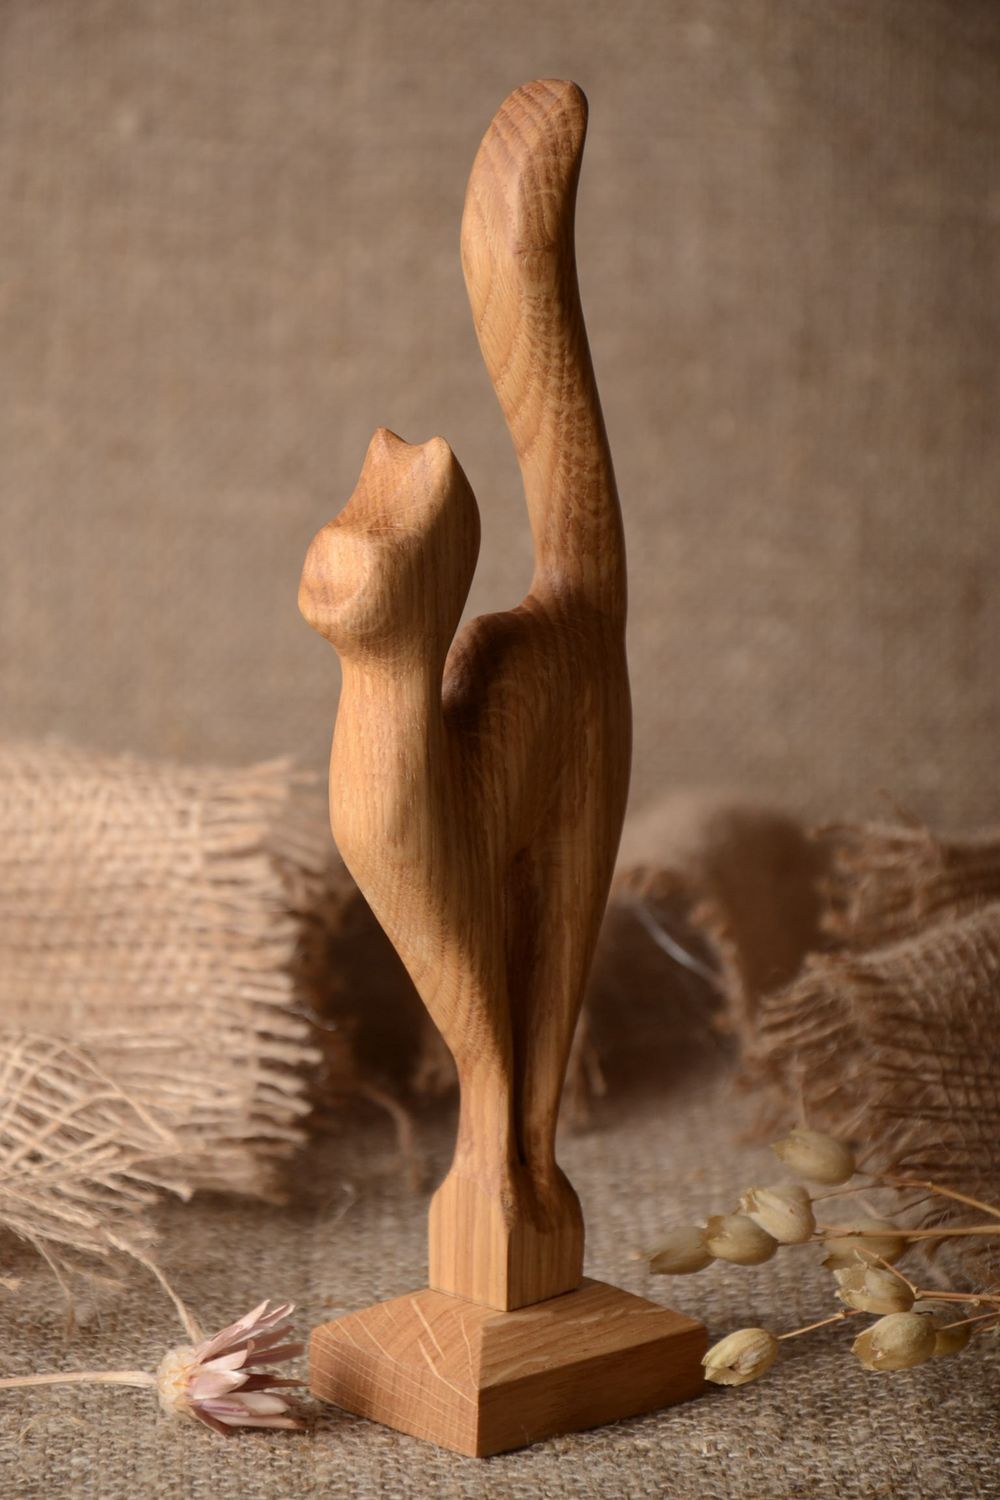 Homemade home decor wood sculpture wooden gifts cat figurines for decorative use photo 1